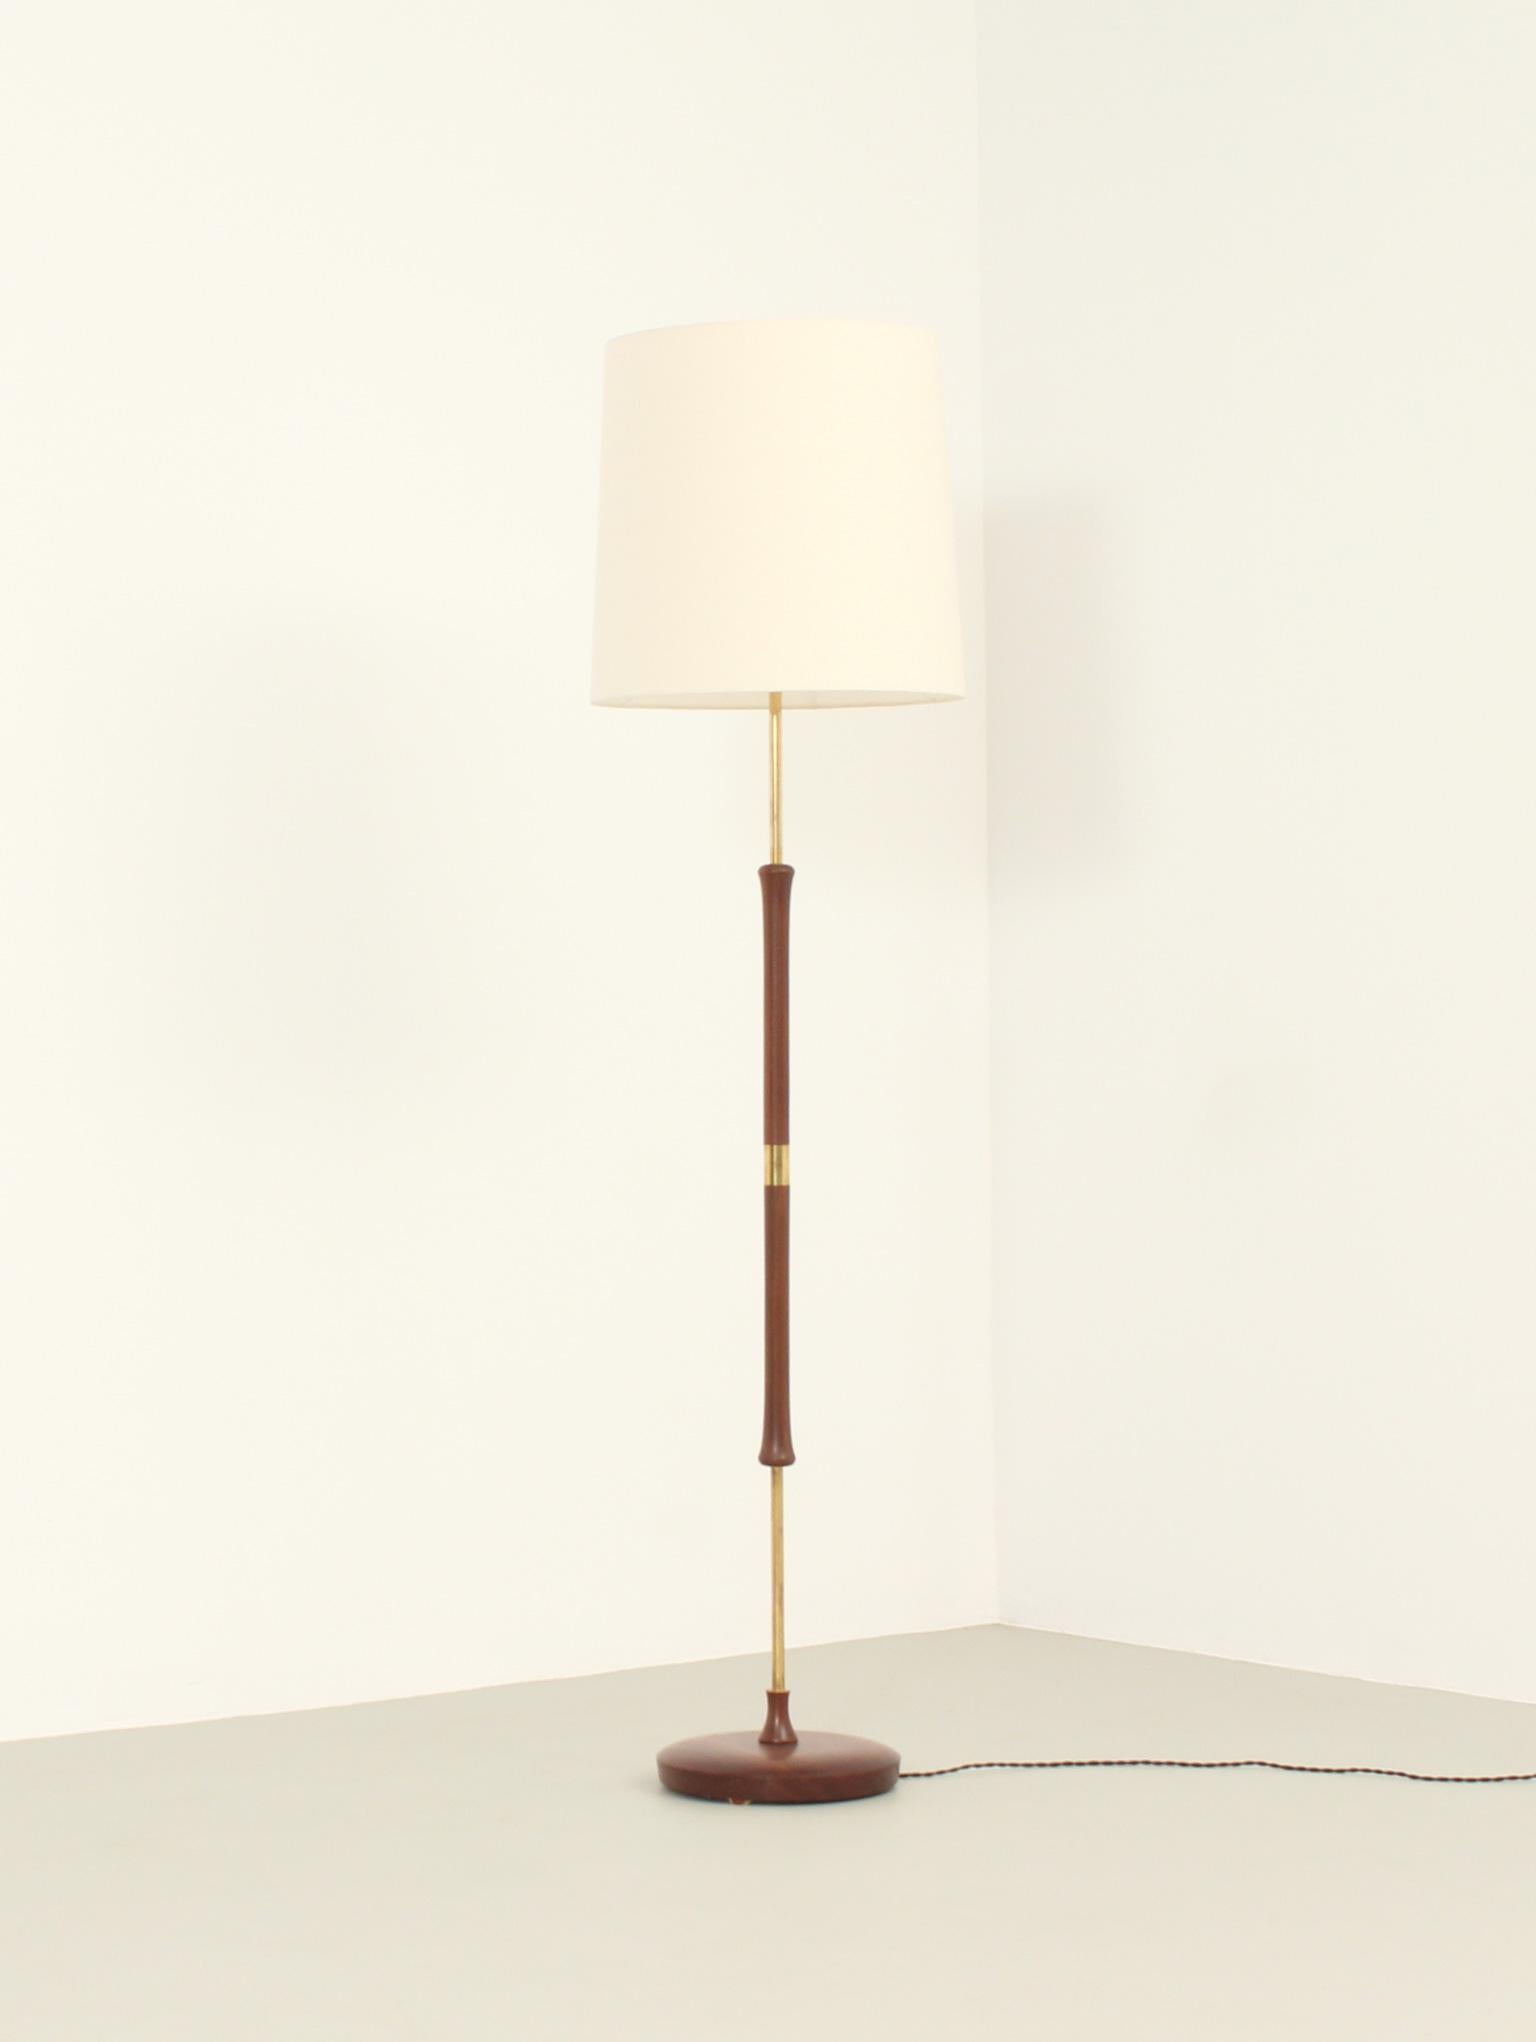 Danish floor lamp from 1950's. Teak wood and brass details and original shade with new fabric.